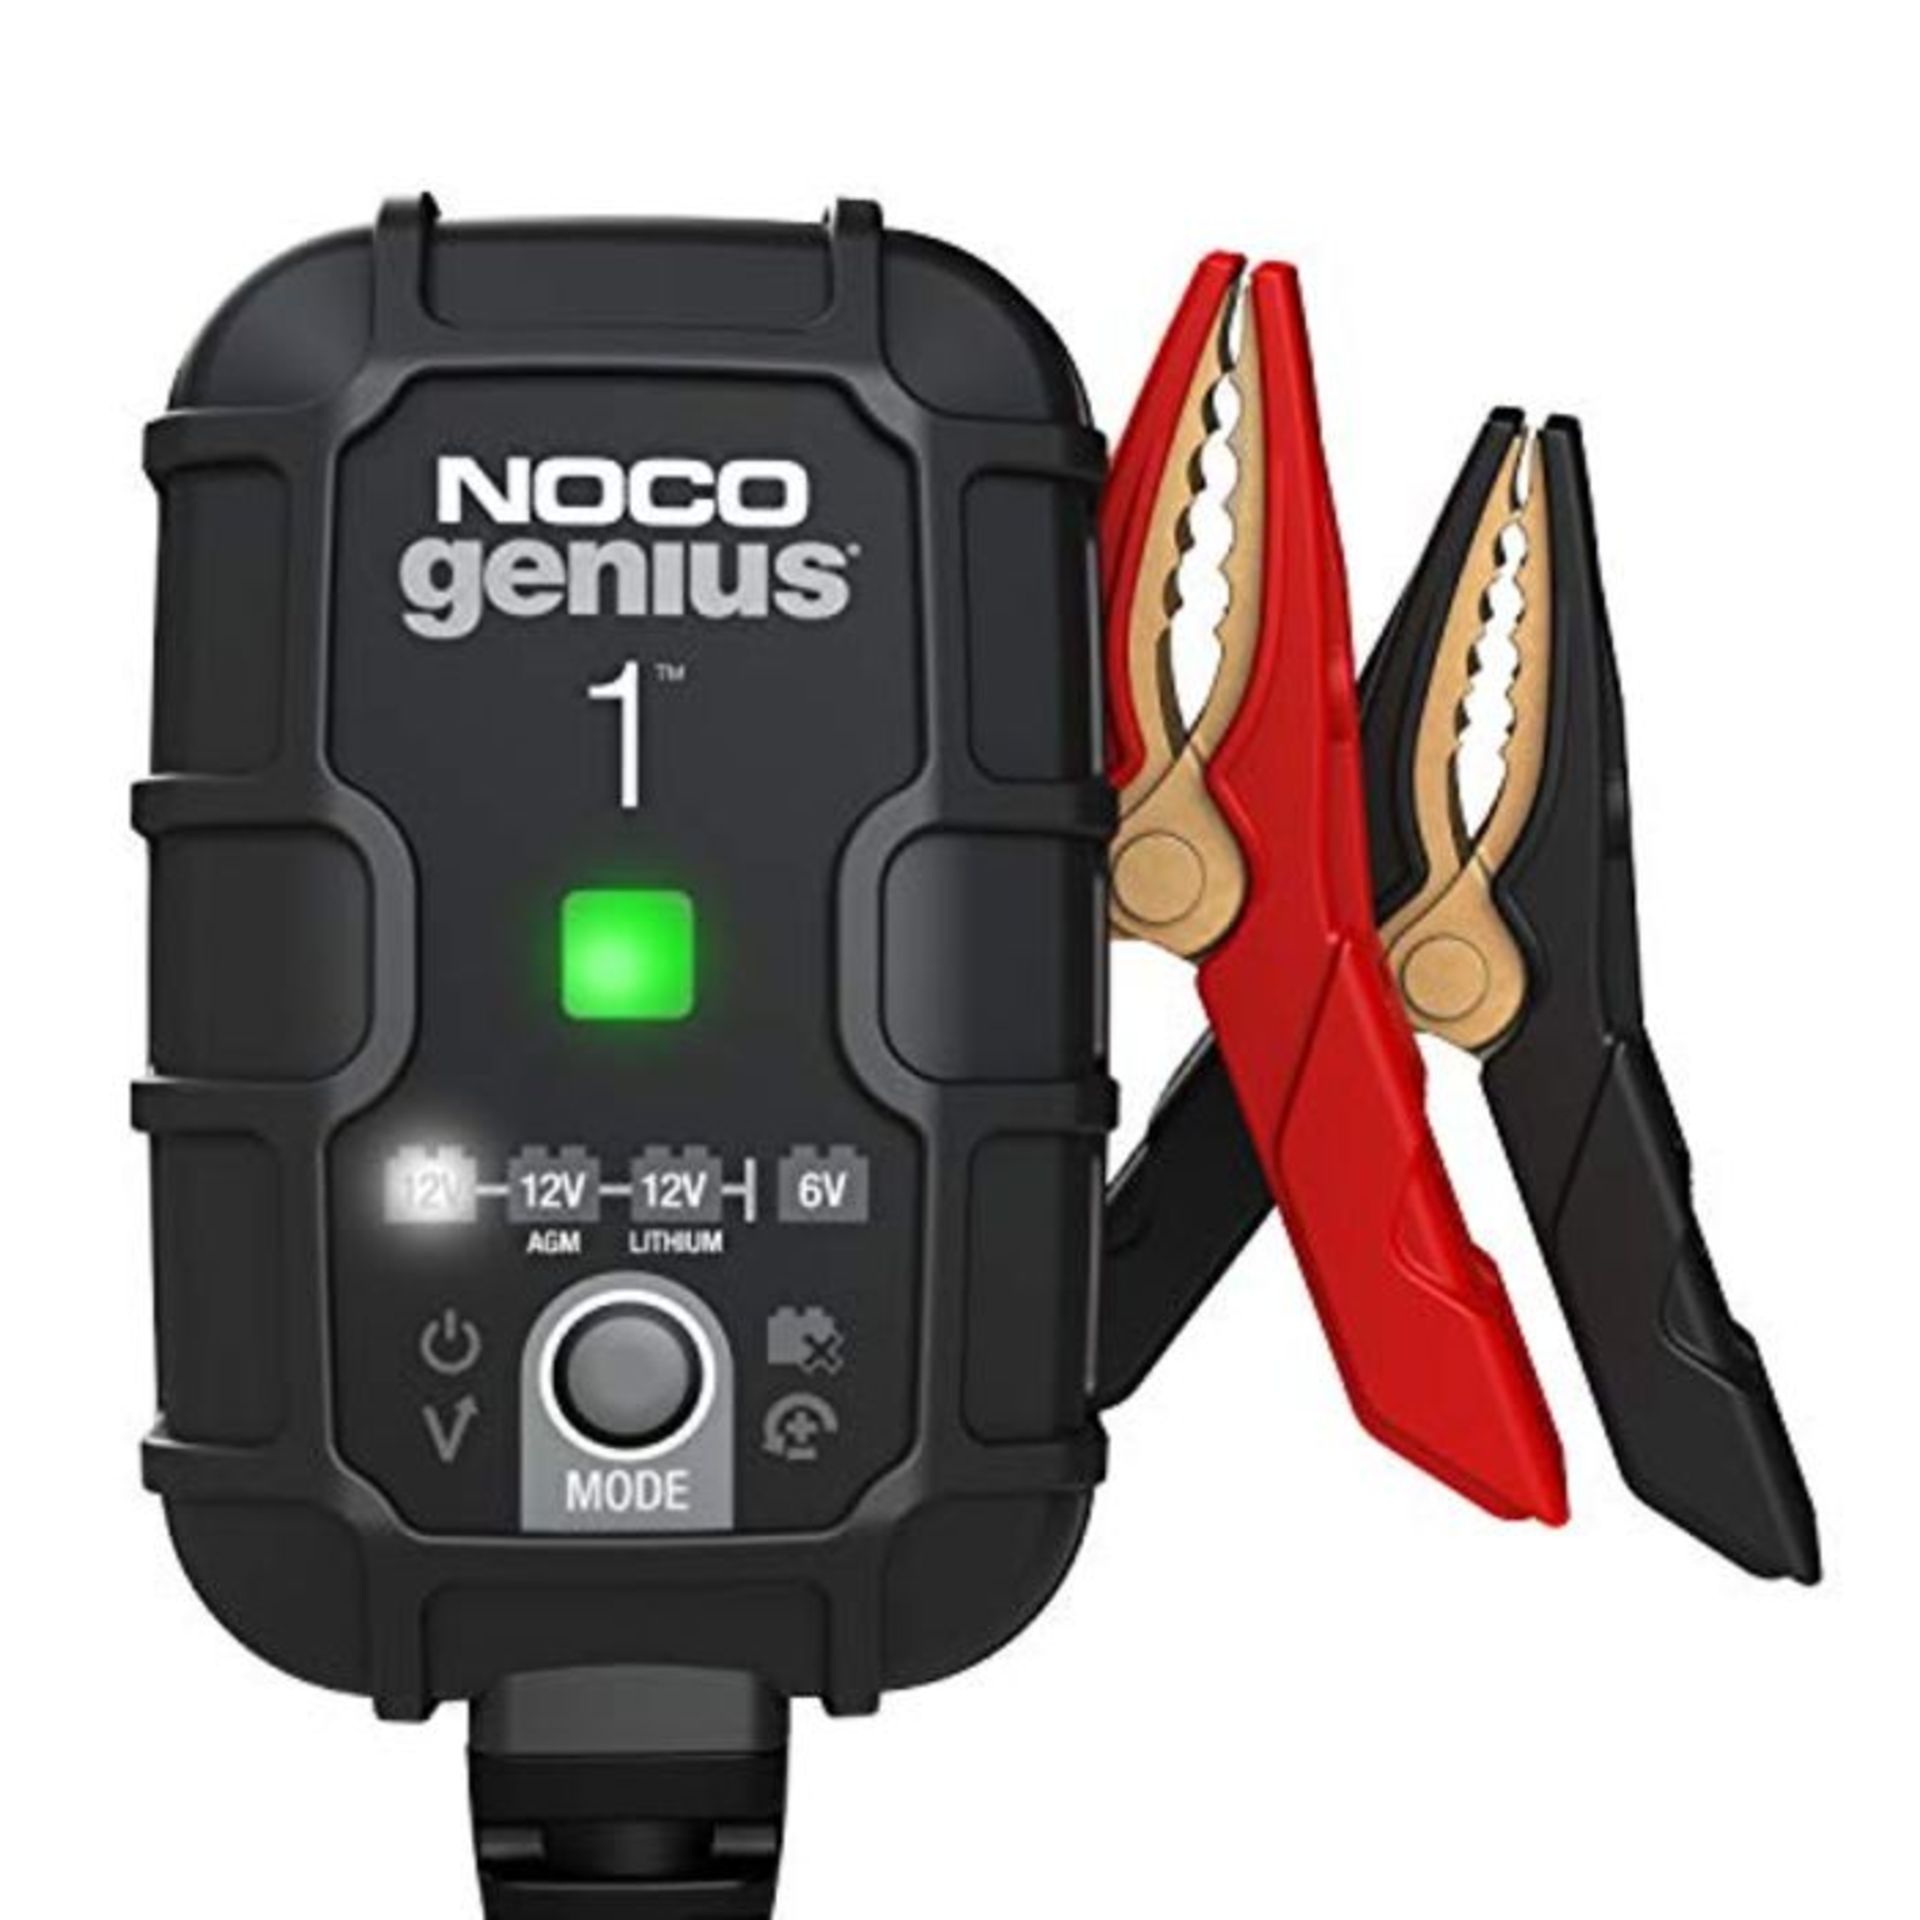 NOCO GENIUS1UK, 1-Amp Fully-Automatic Smart Charger, 6V And 12V Battery Charging Units - Image 2 of 3